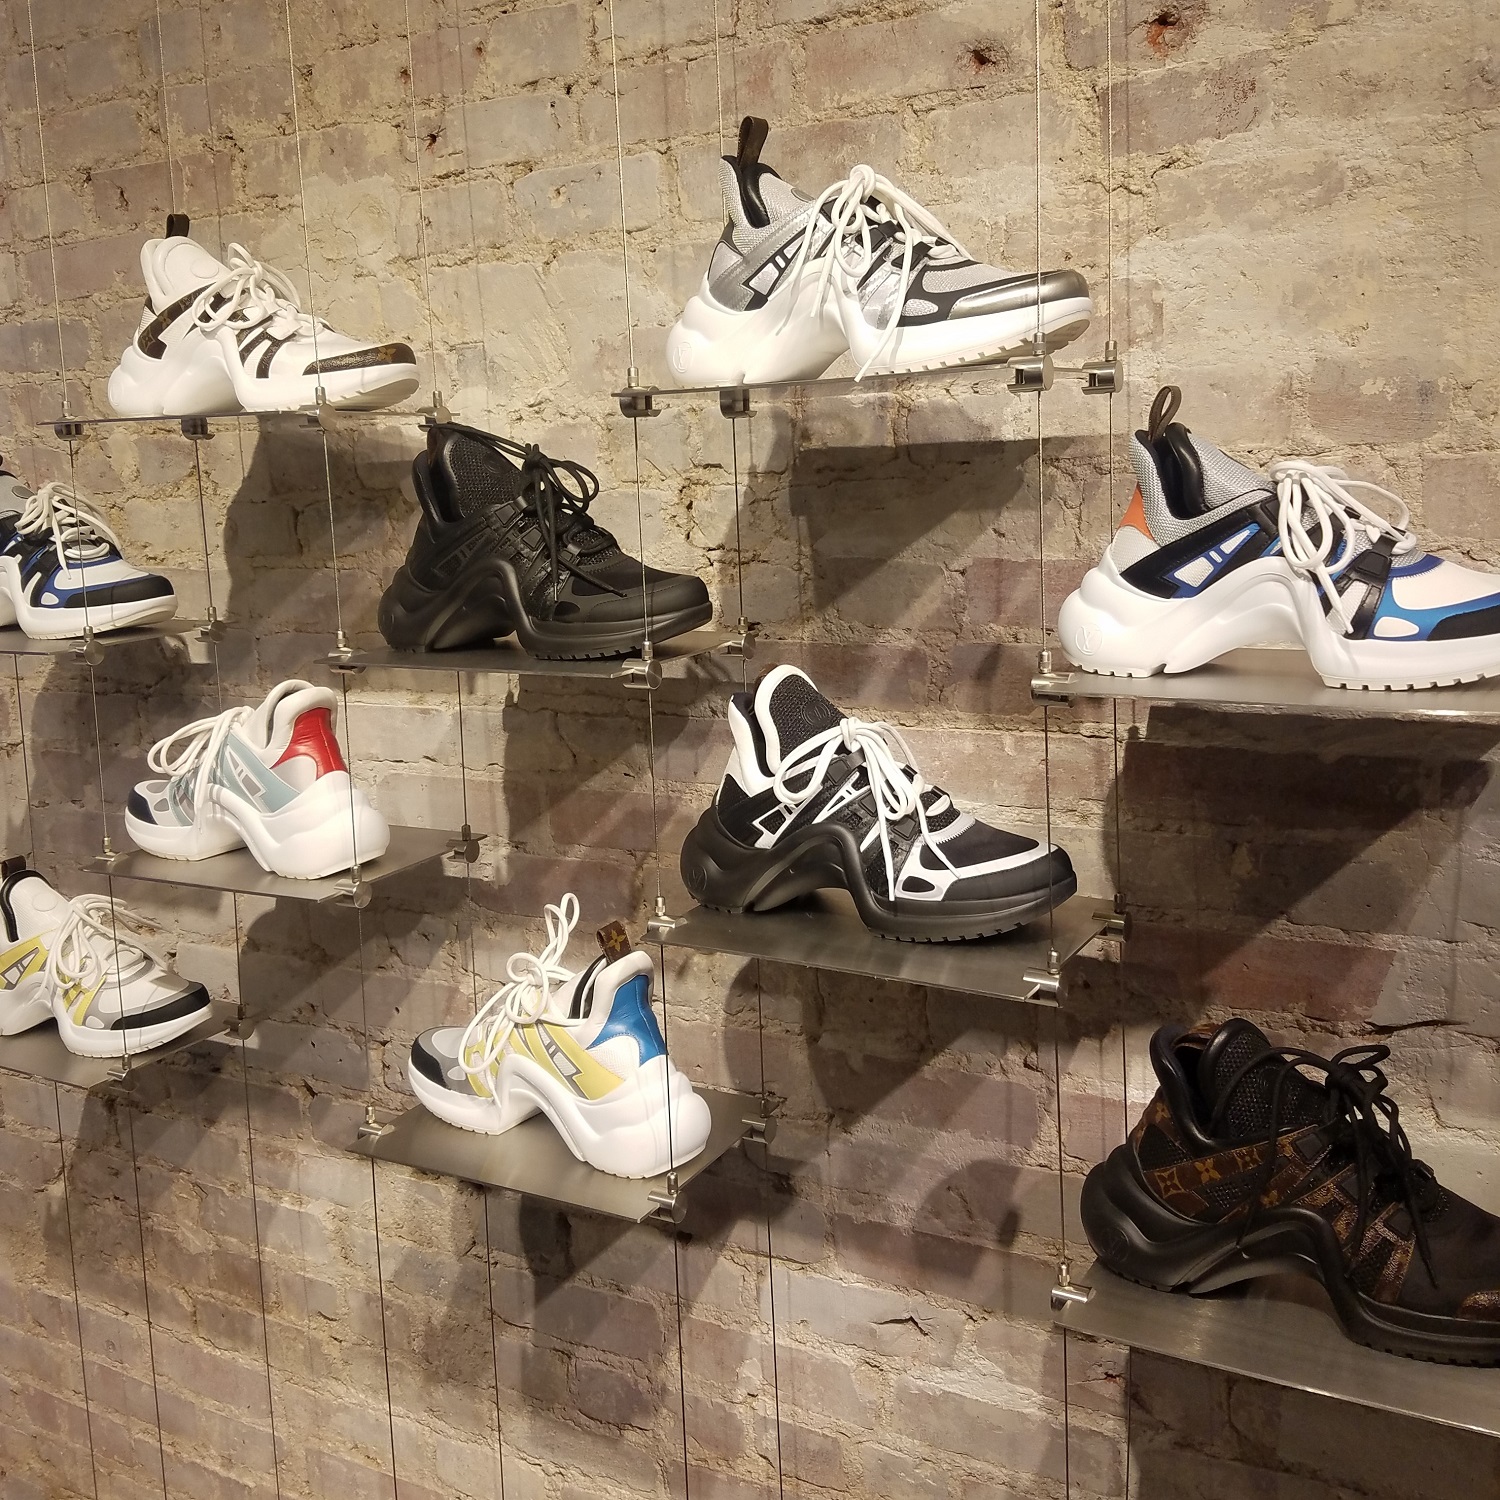 Louis Vuitton Is Launching A Pop Up Store For Their New Archlight Sneakers  — CNK Daily (ChicksNKicks)